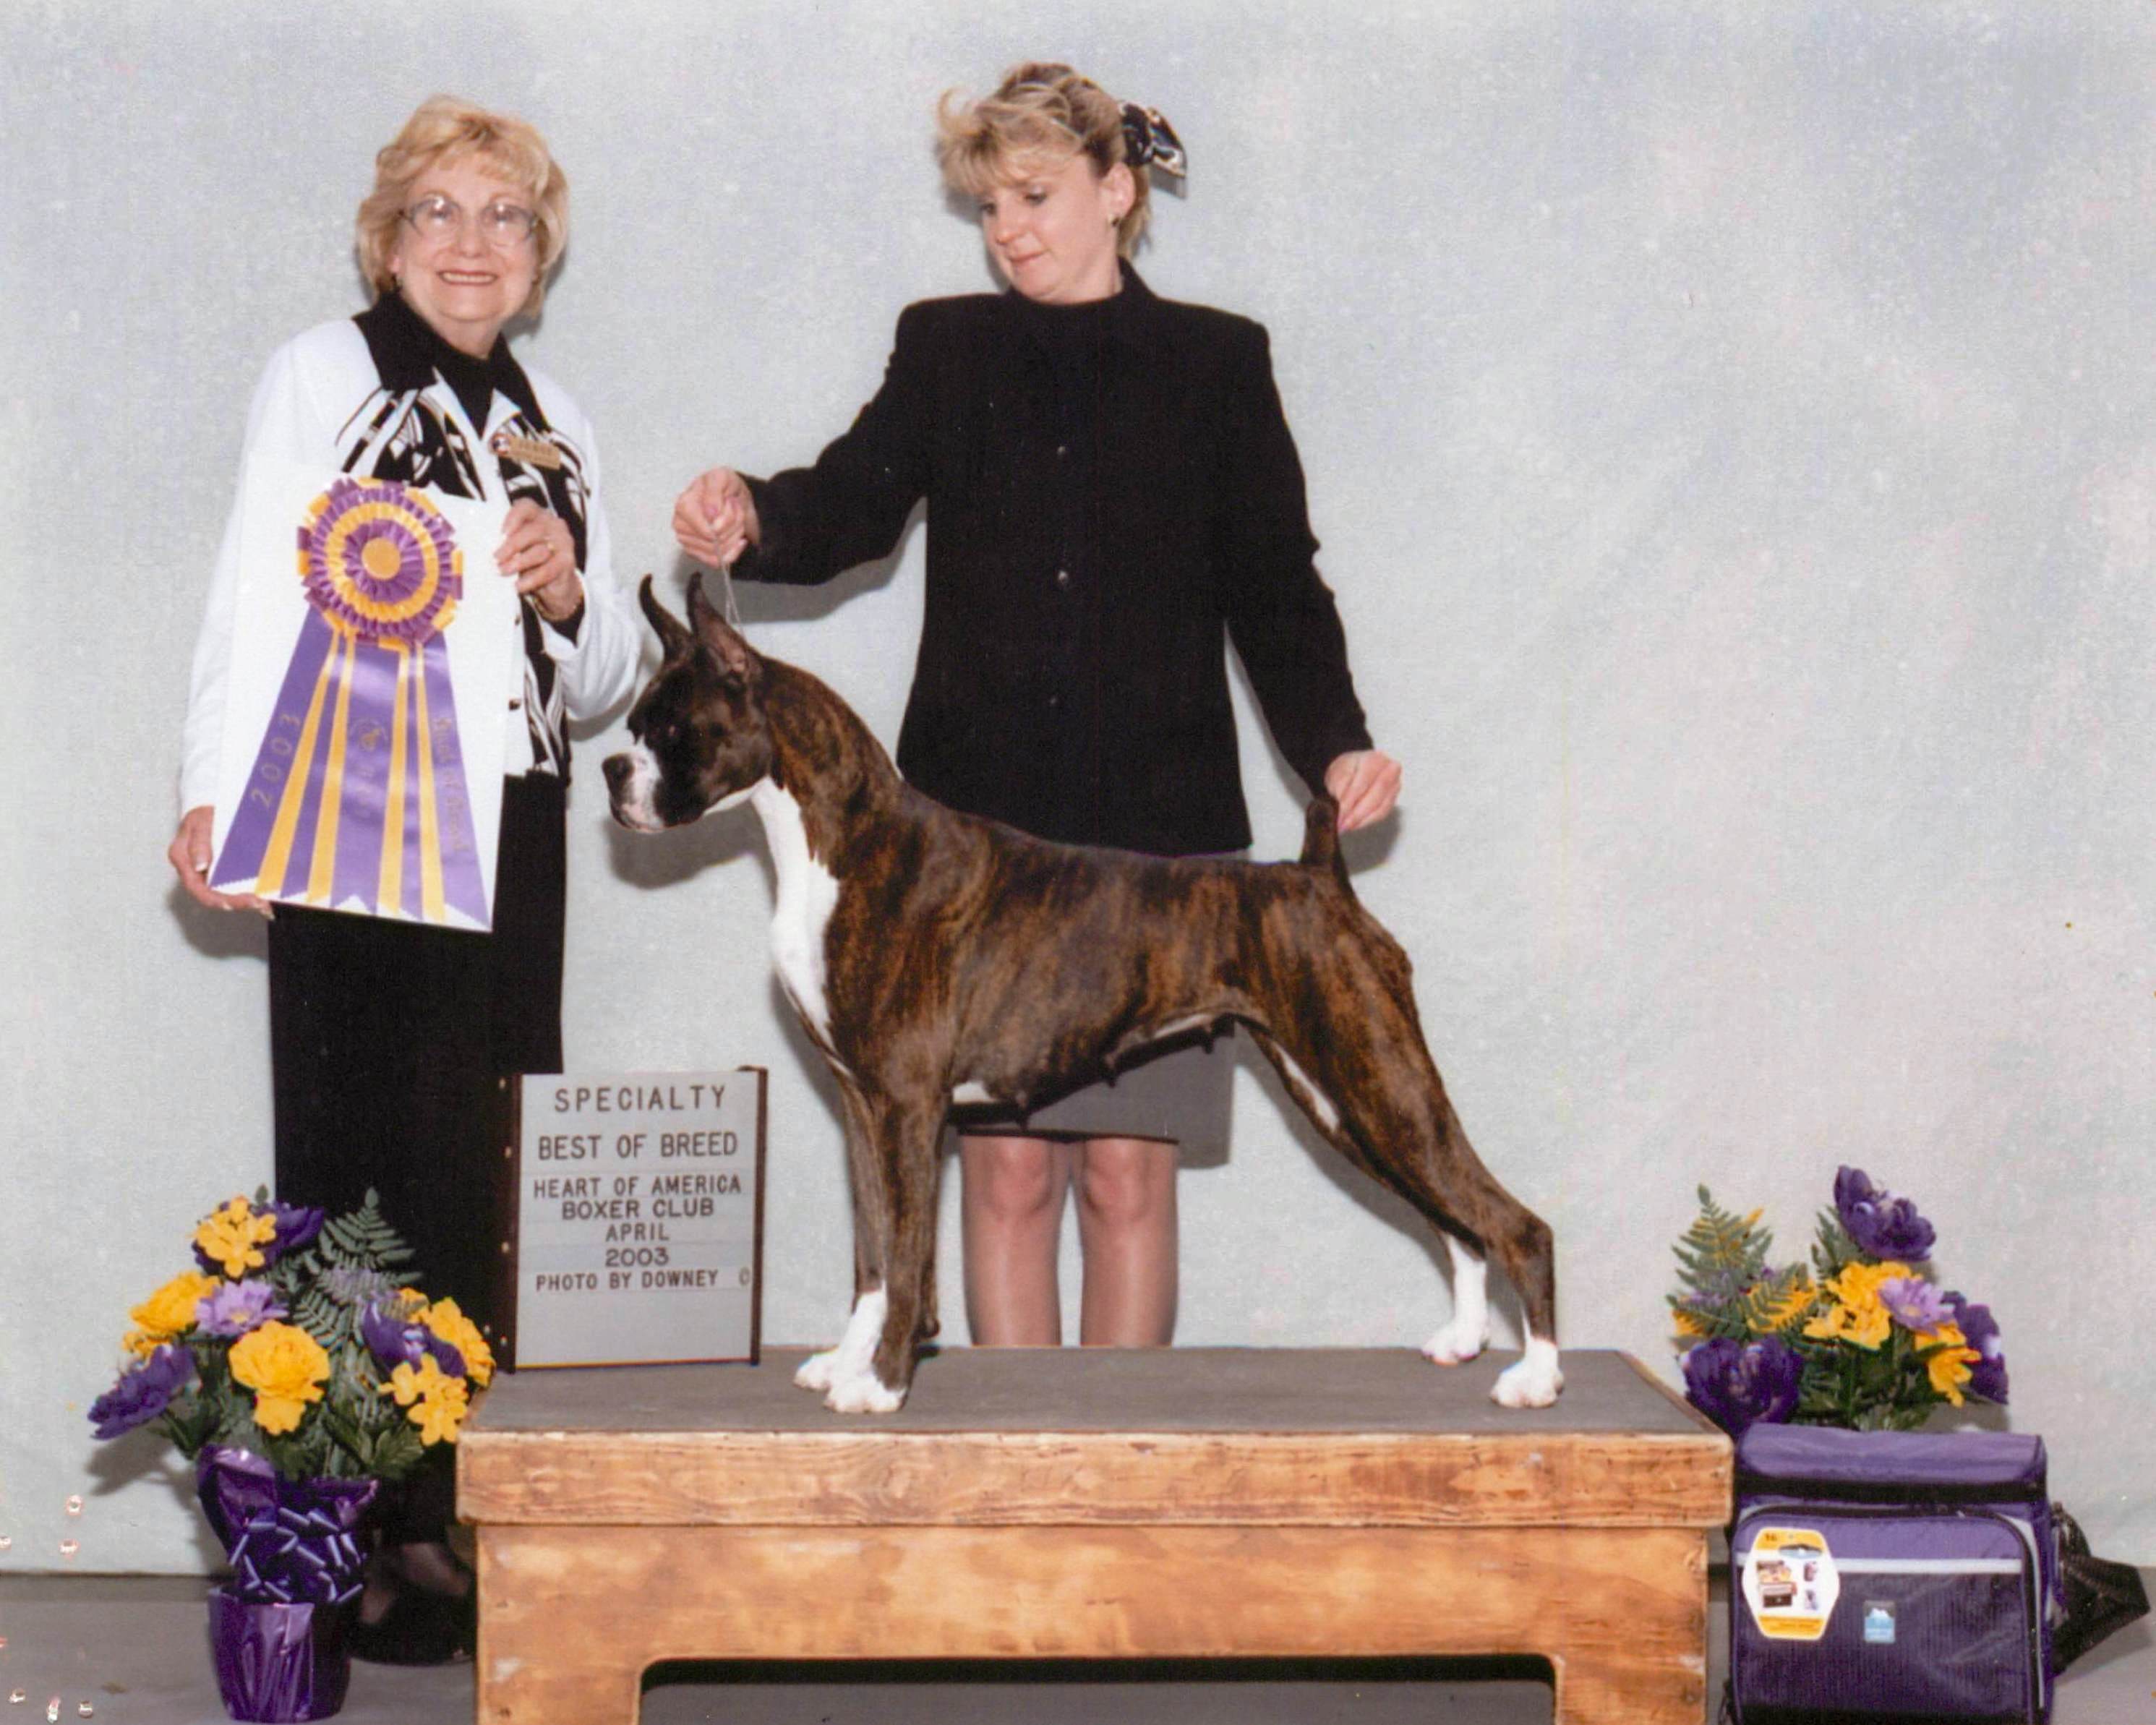 Best of Breed @ 2003 Specialty Show #1